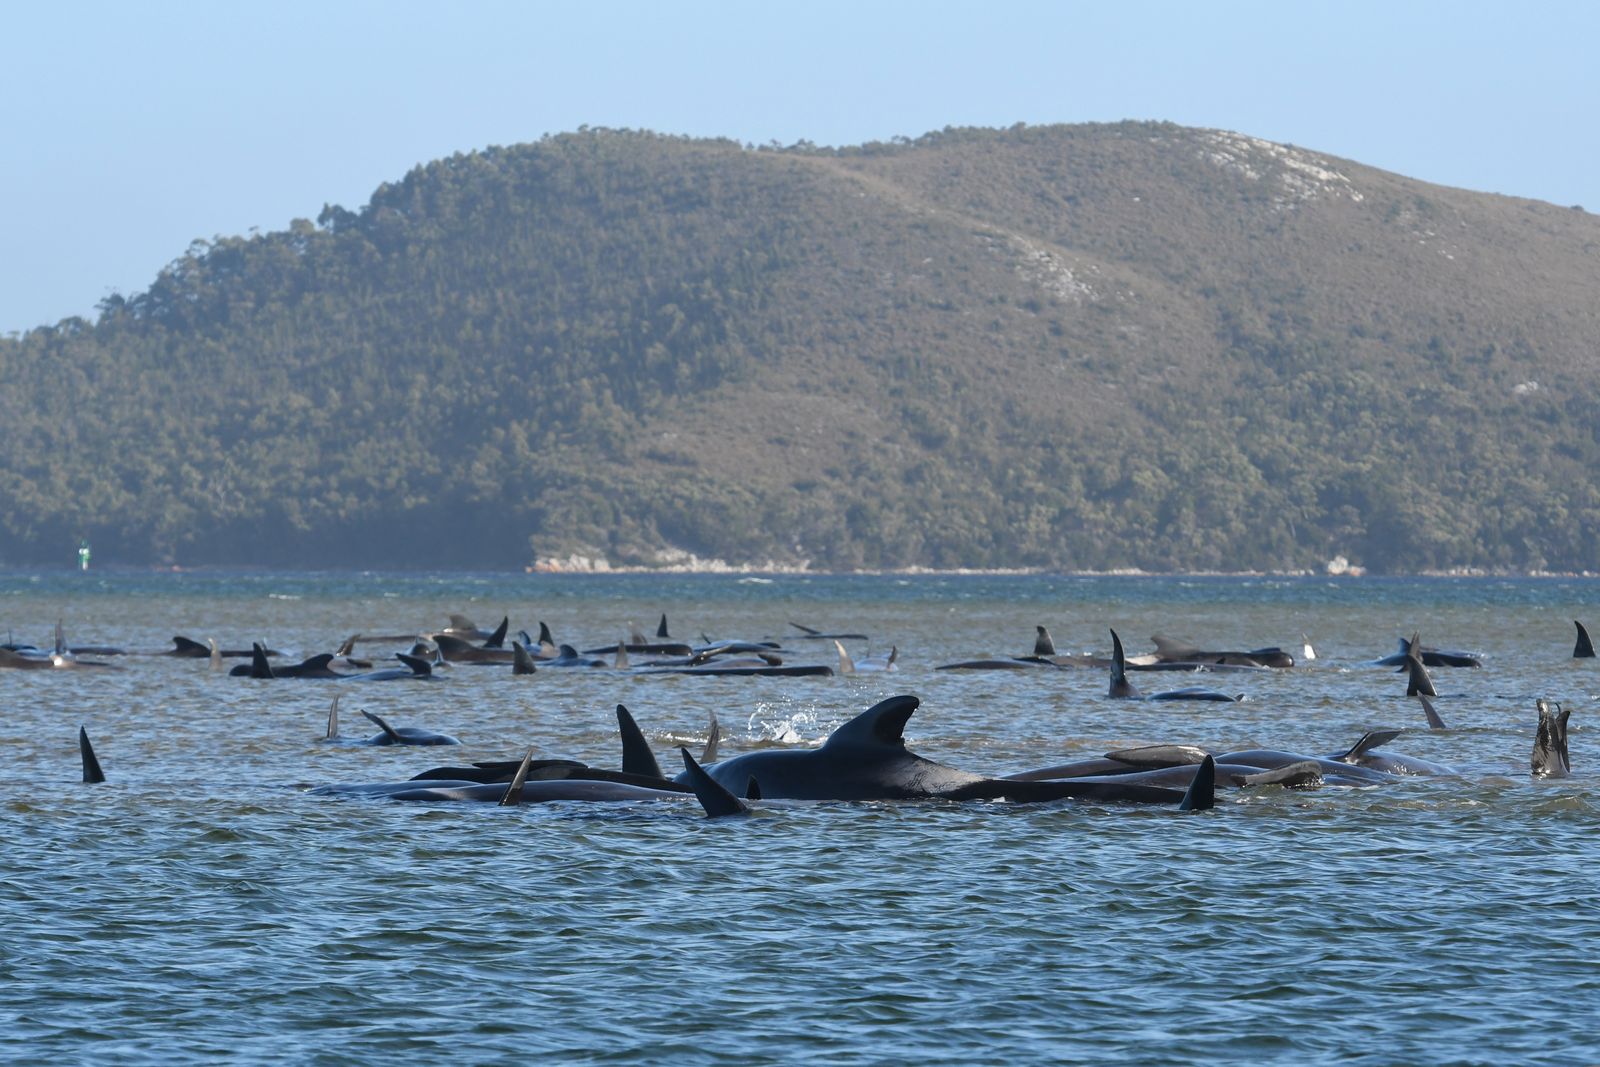 Dozens Of Pilot Whales Die In New Zealand's 3rd Mass Stranding In A Week